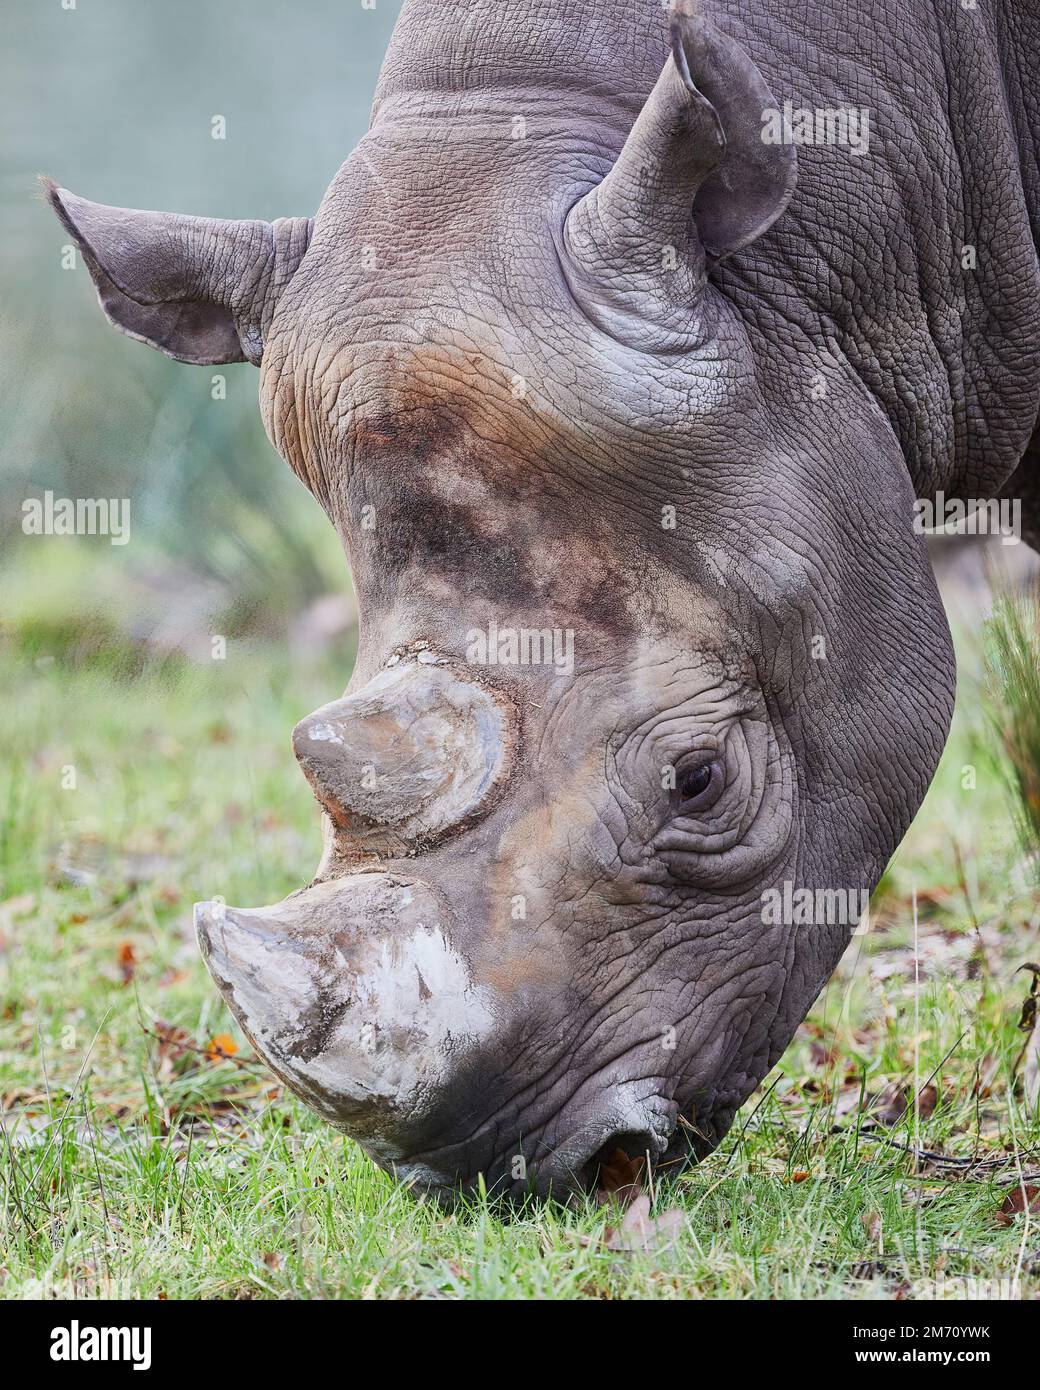 Close-up portrait of the head of a grass grazing Black Rhinoceros Stock Photo